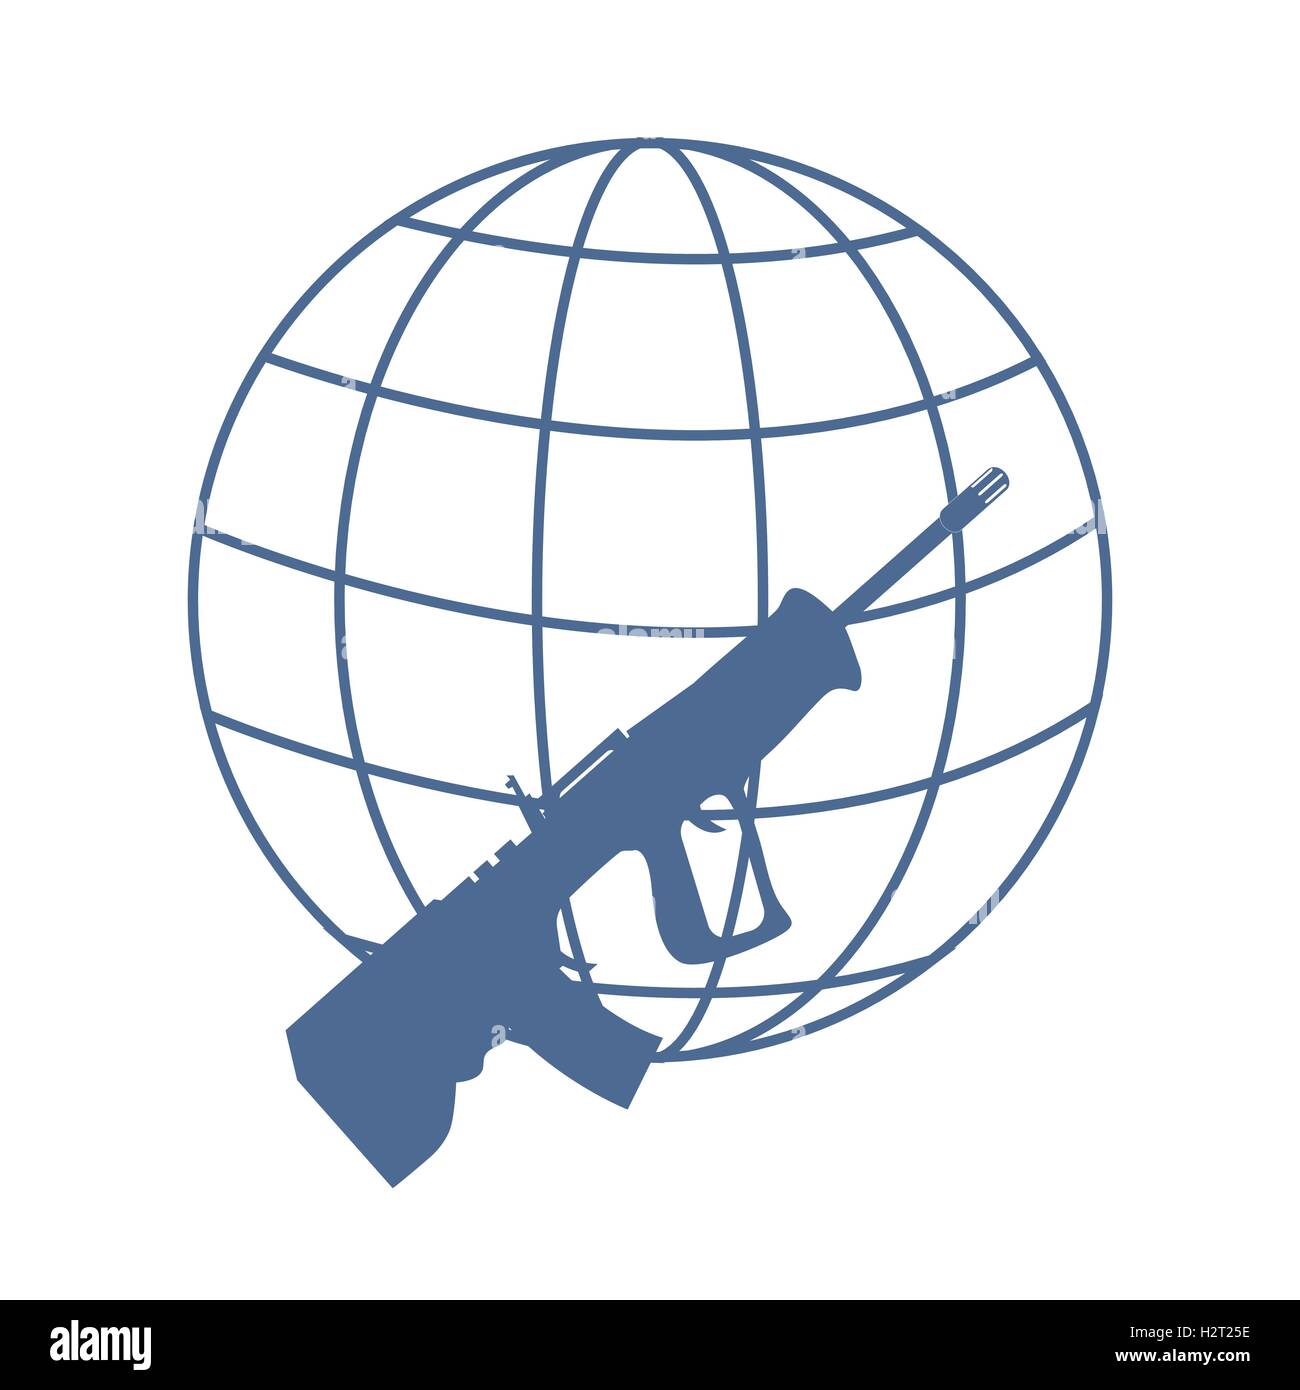 Picture symbolizing the world against weapons: rifle and globe on white background Stock Vector